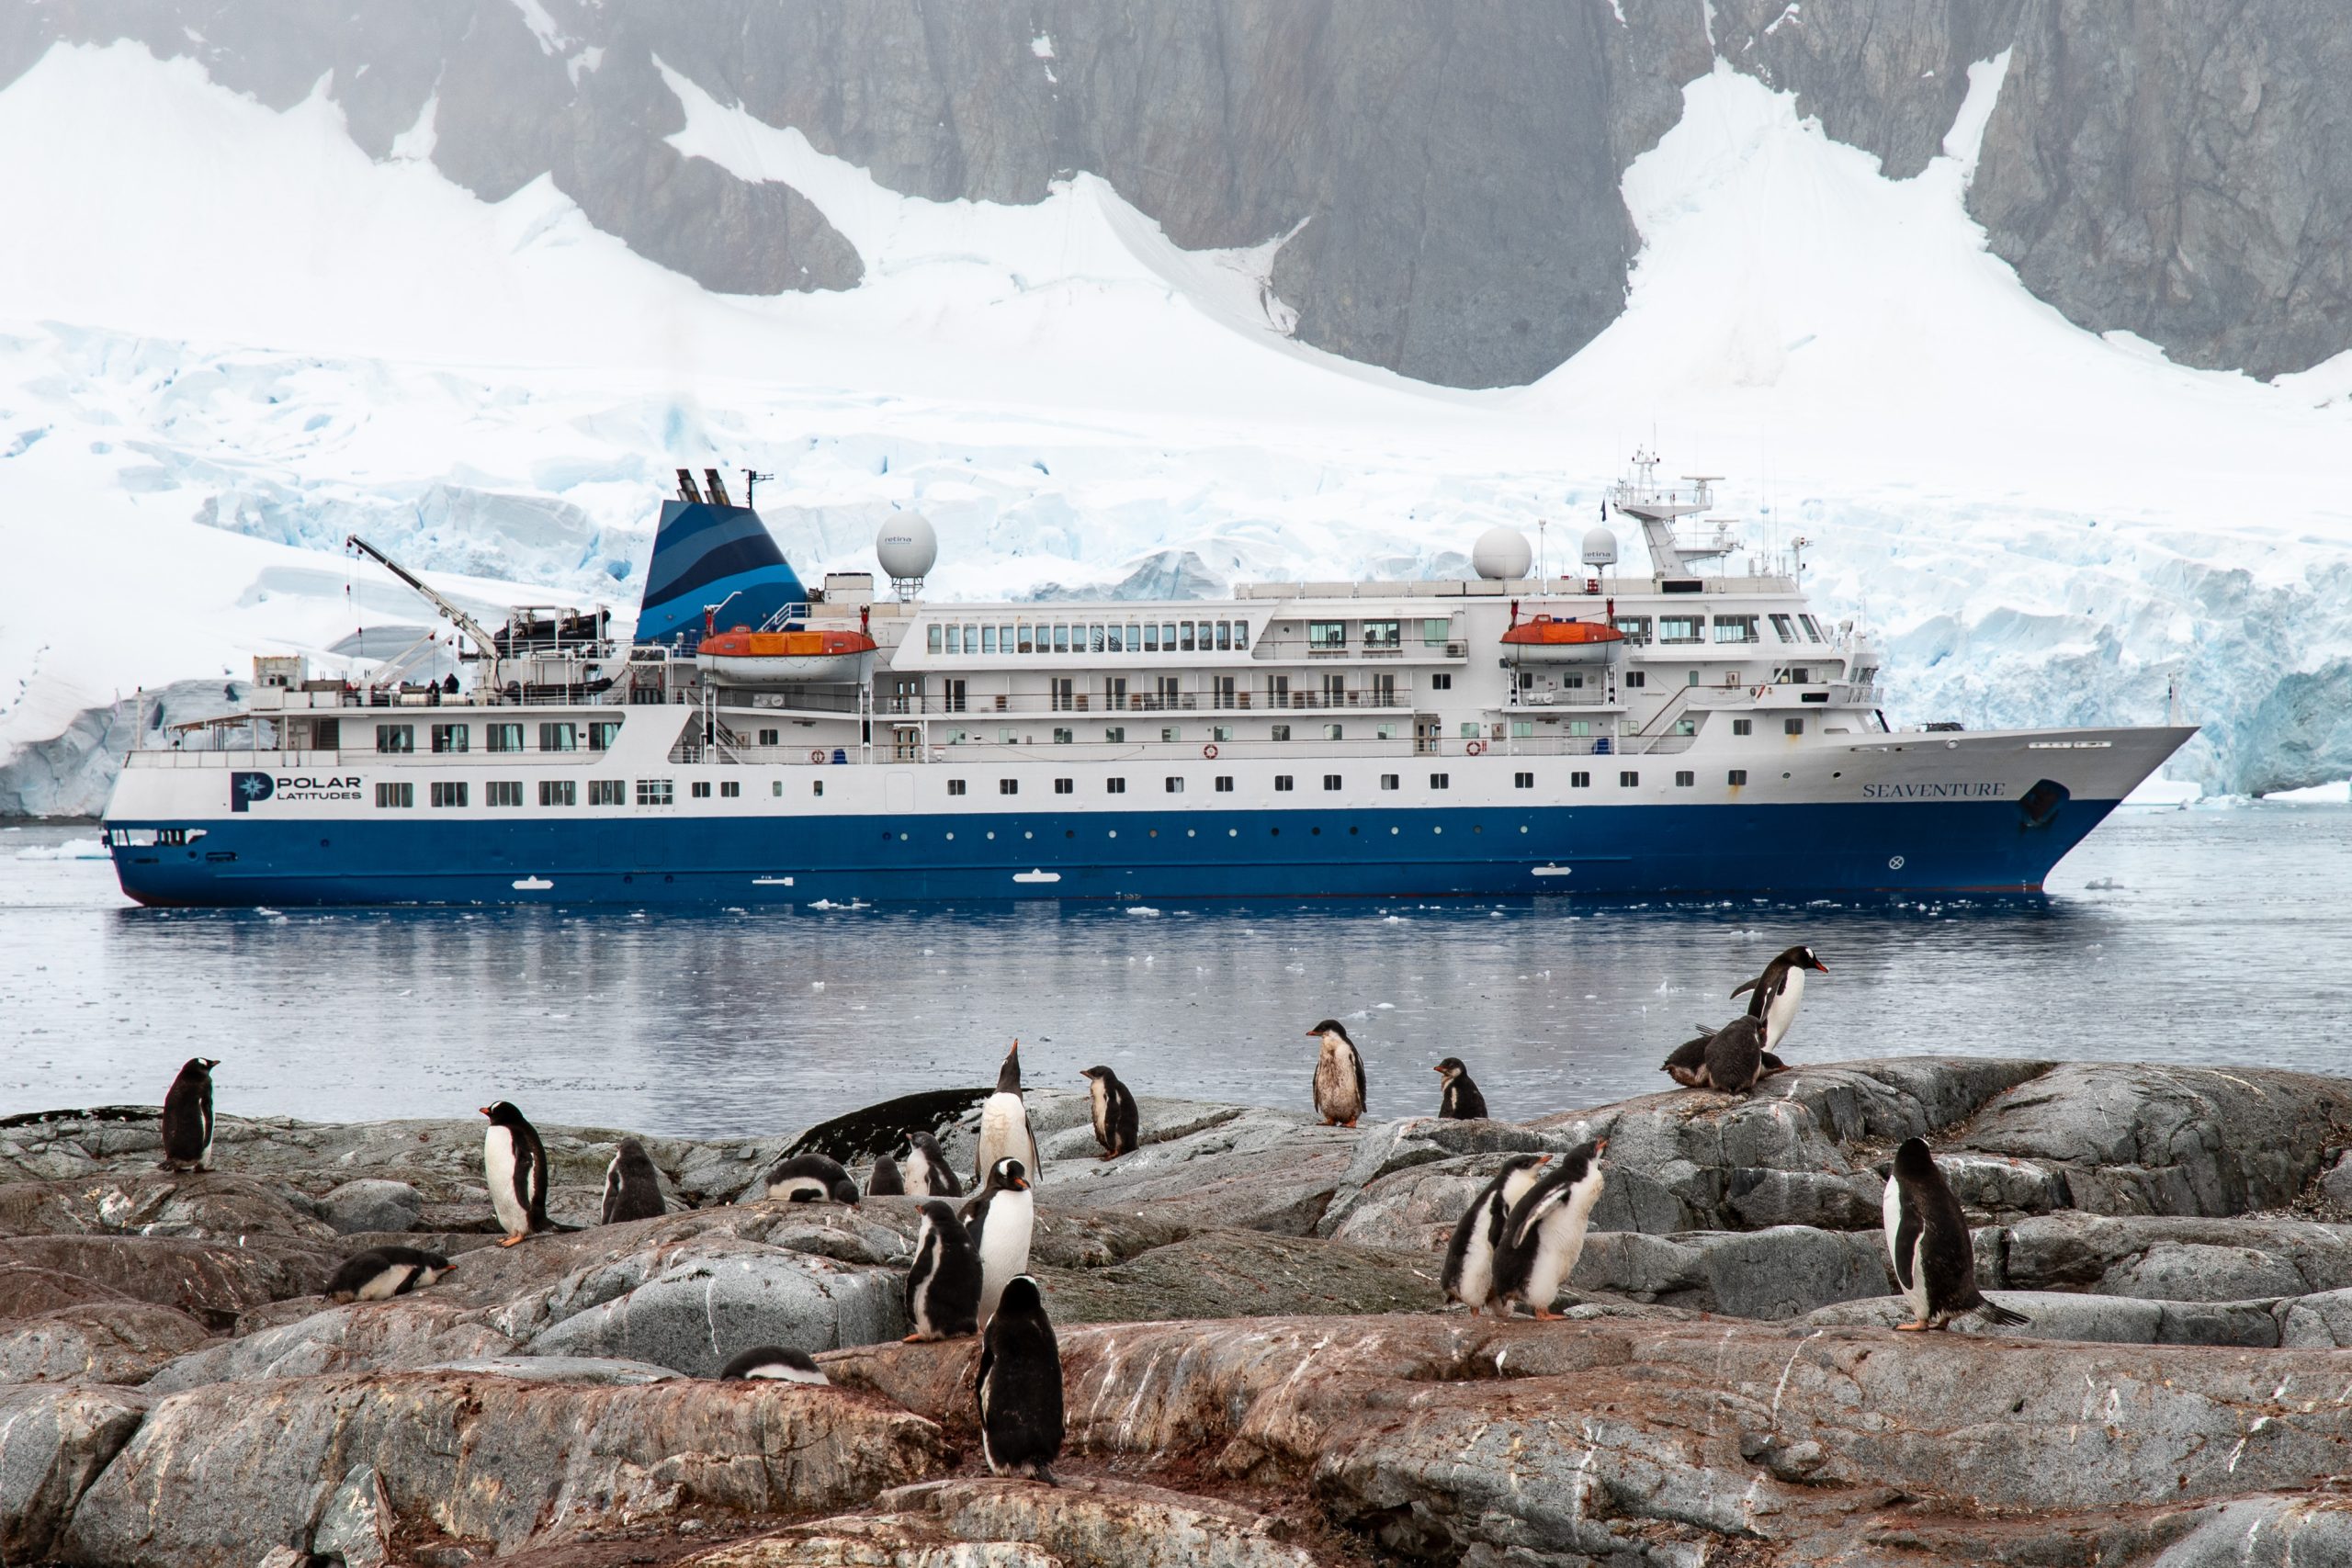 Seaventure ship in Antarctica with penguins in foreground